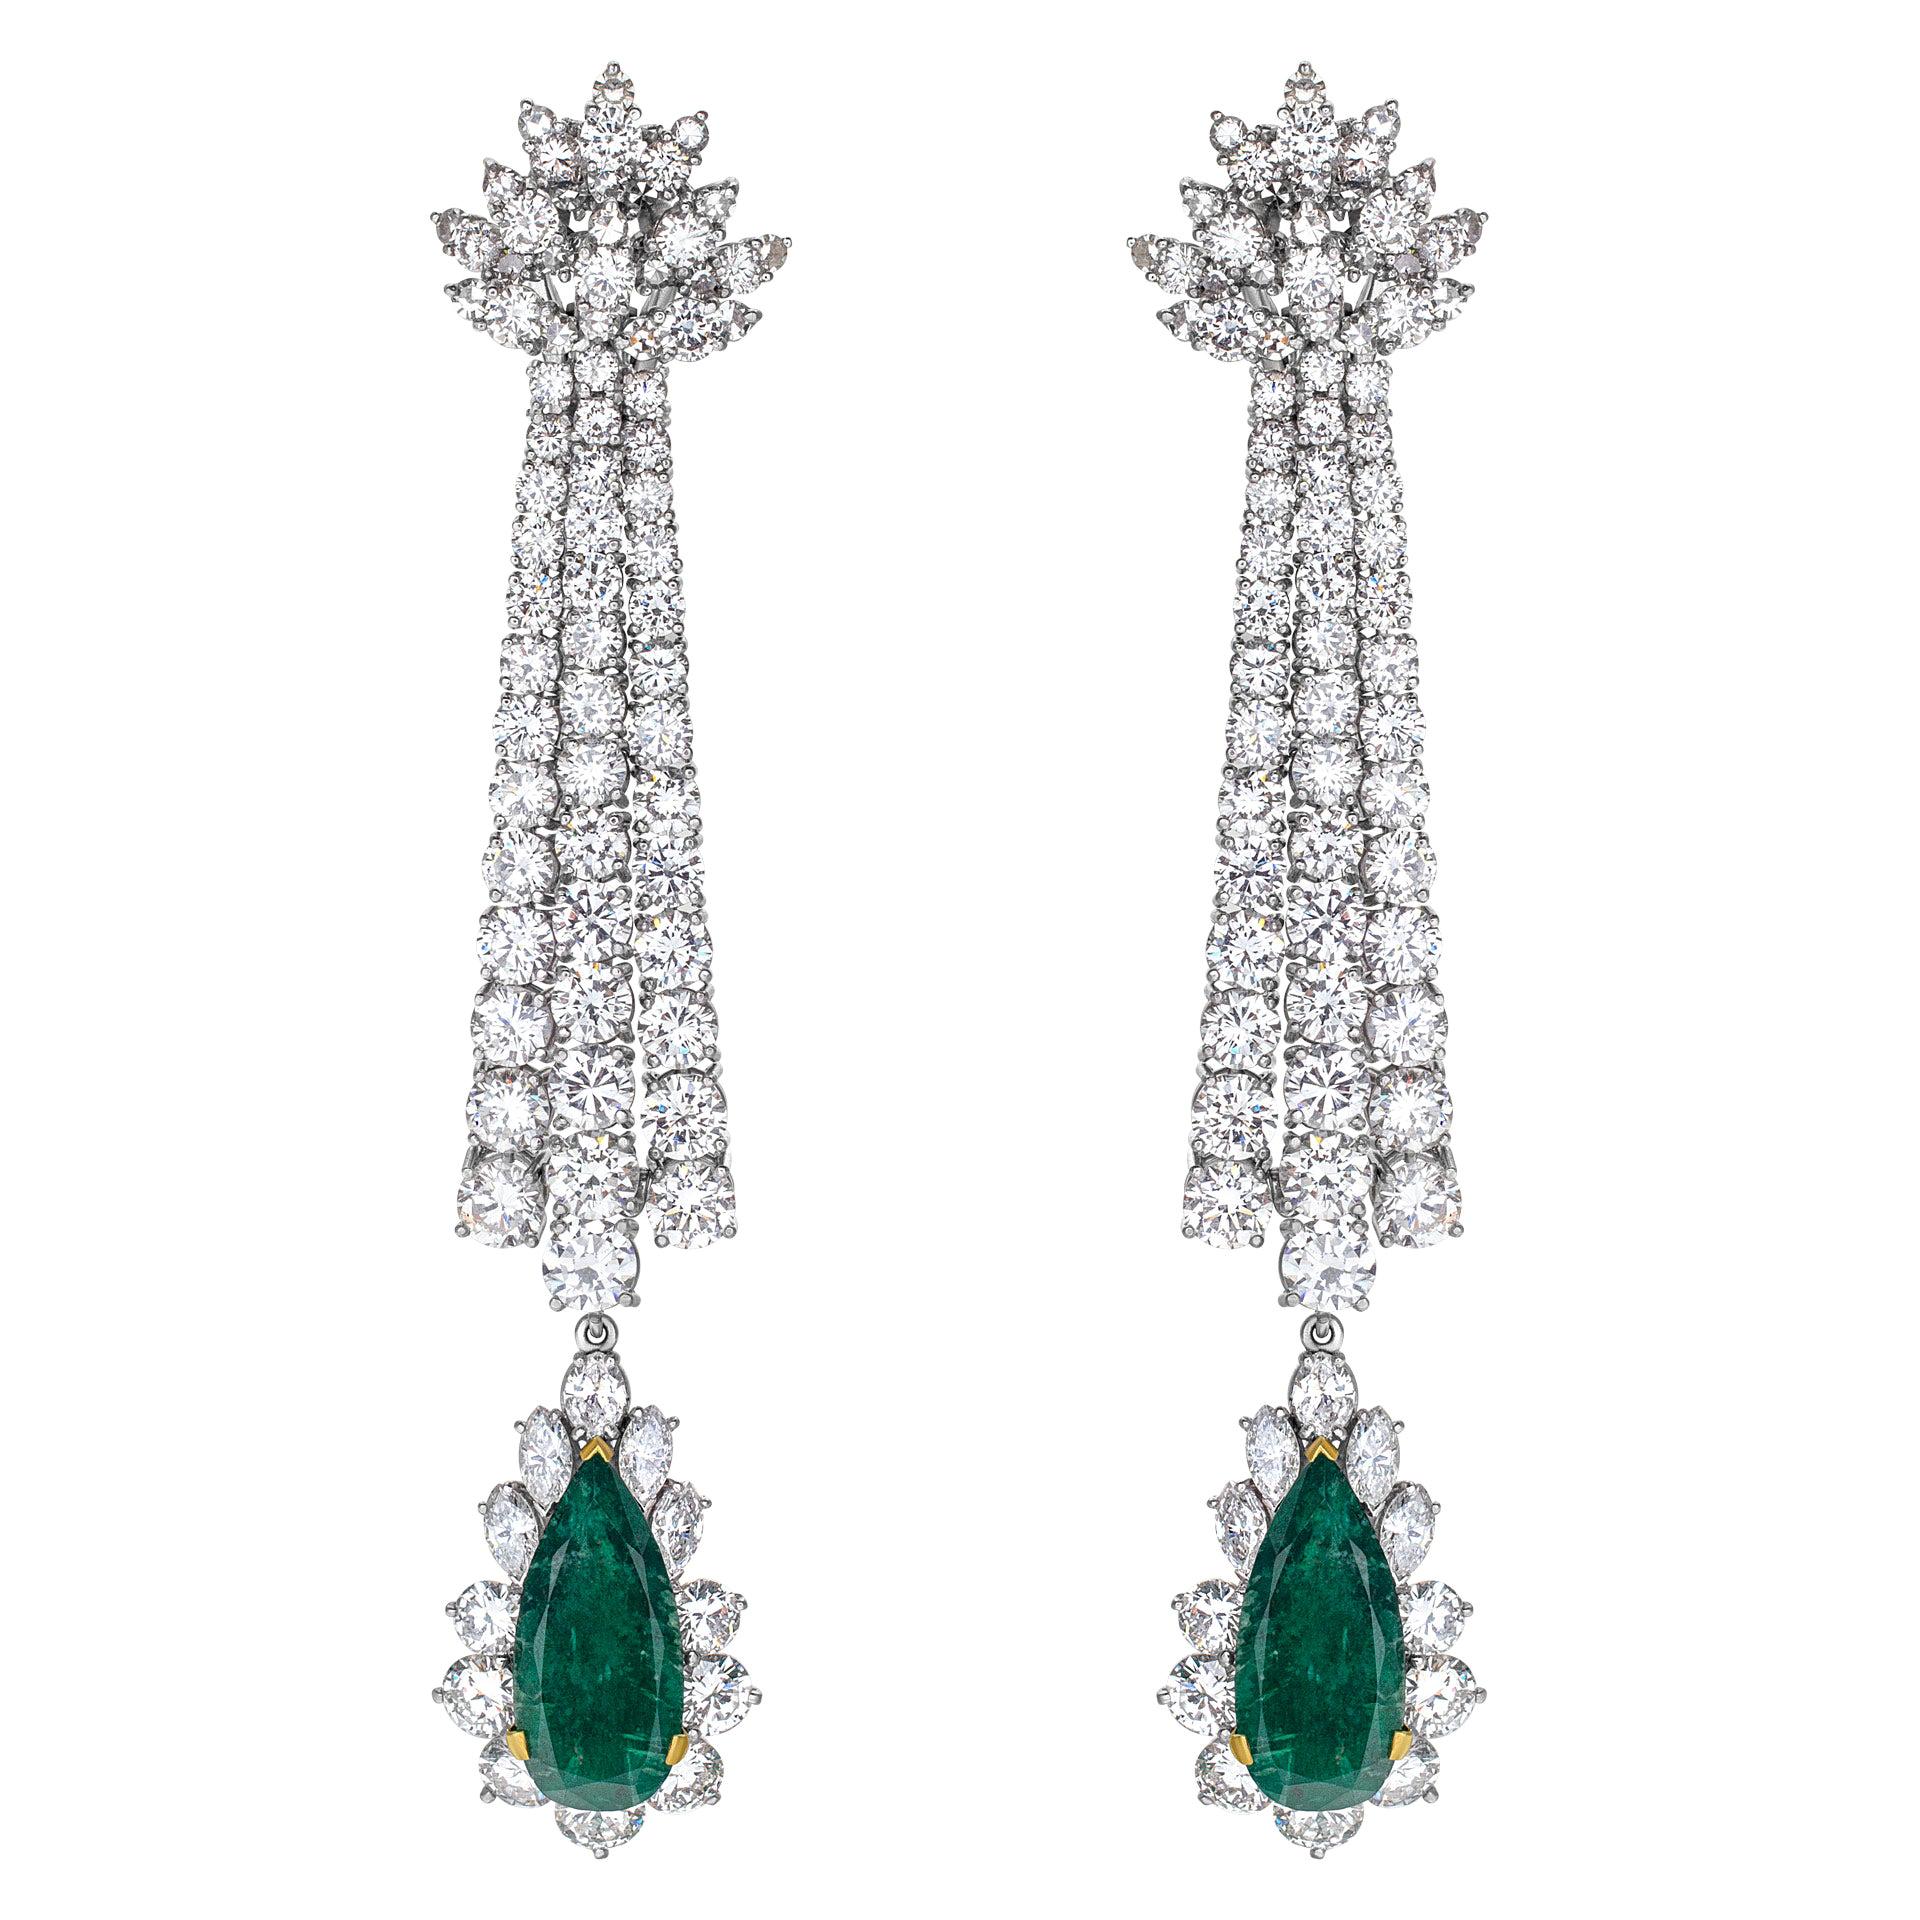 Drop Diamond Earrings with Emeralds in Platinum